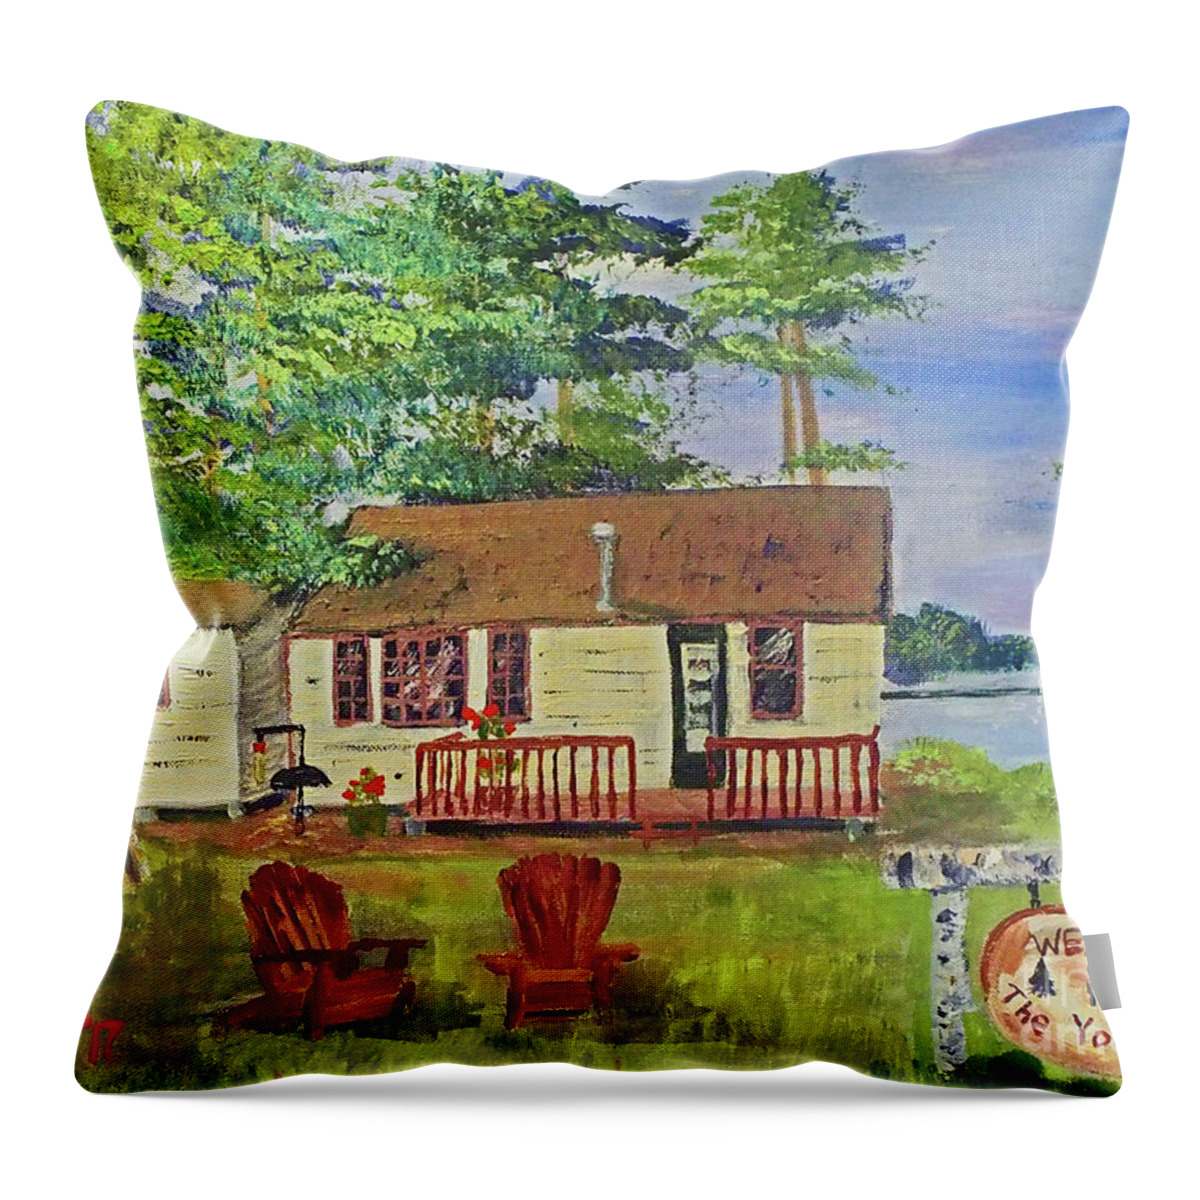 #anniversarygift Throw Pillow featuring the painting The Young's Camp by Francois Lamothe